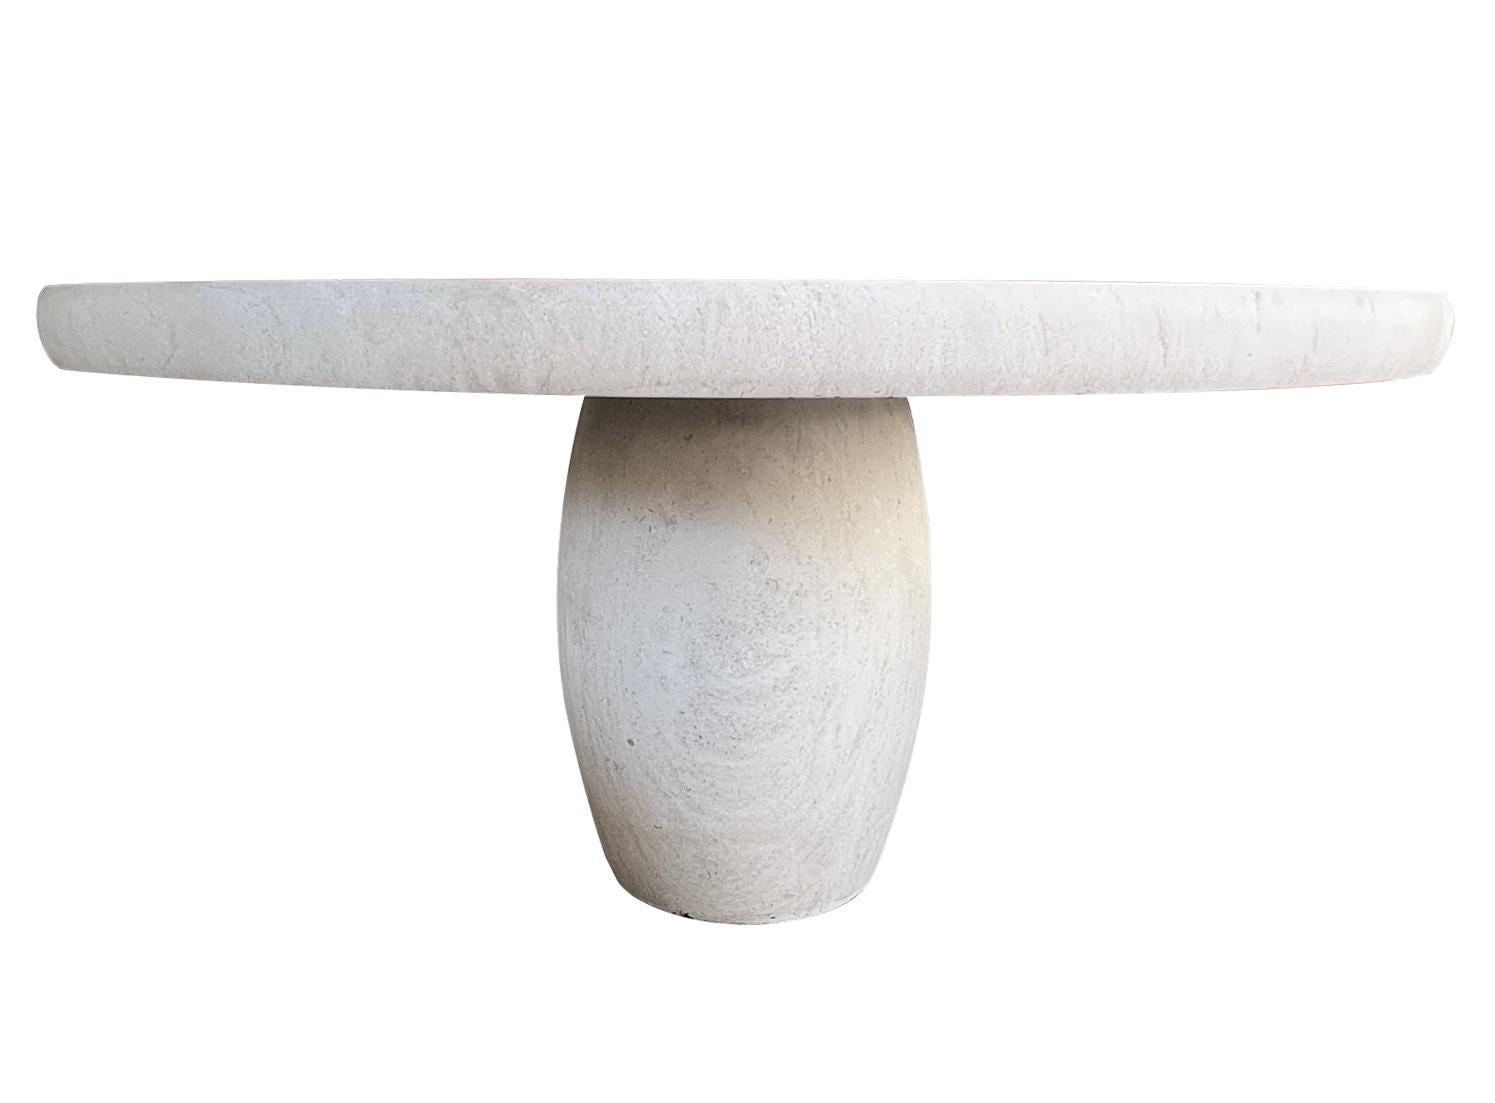 Made in France from French limestone, the table is comprised of a thick round top with bullnose edge and barrel-form support. New with only minimal wear expected; table is ideal for exterior design projects. Due to the custom nature of each table,